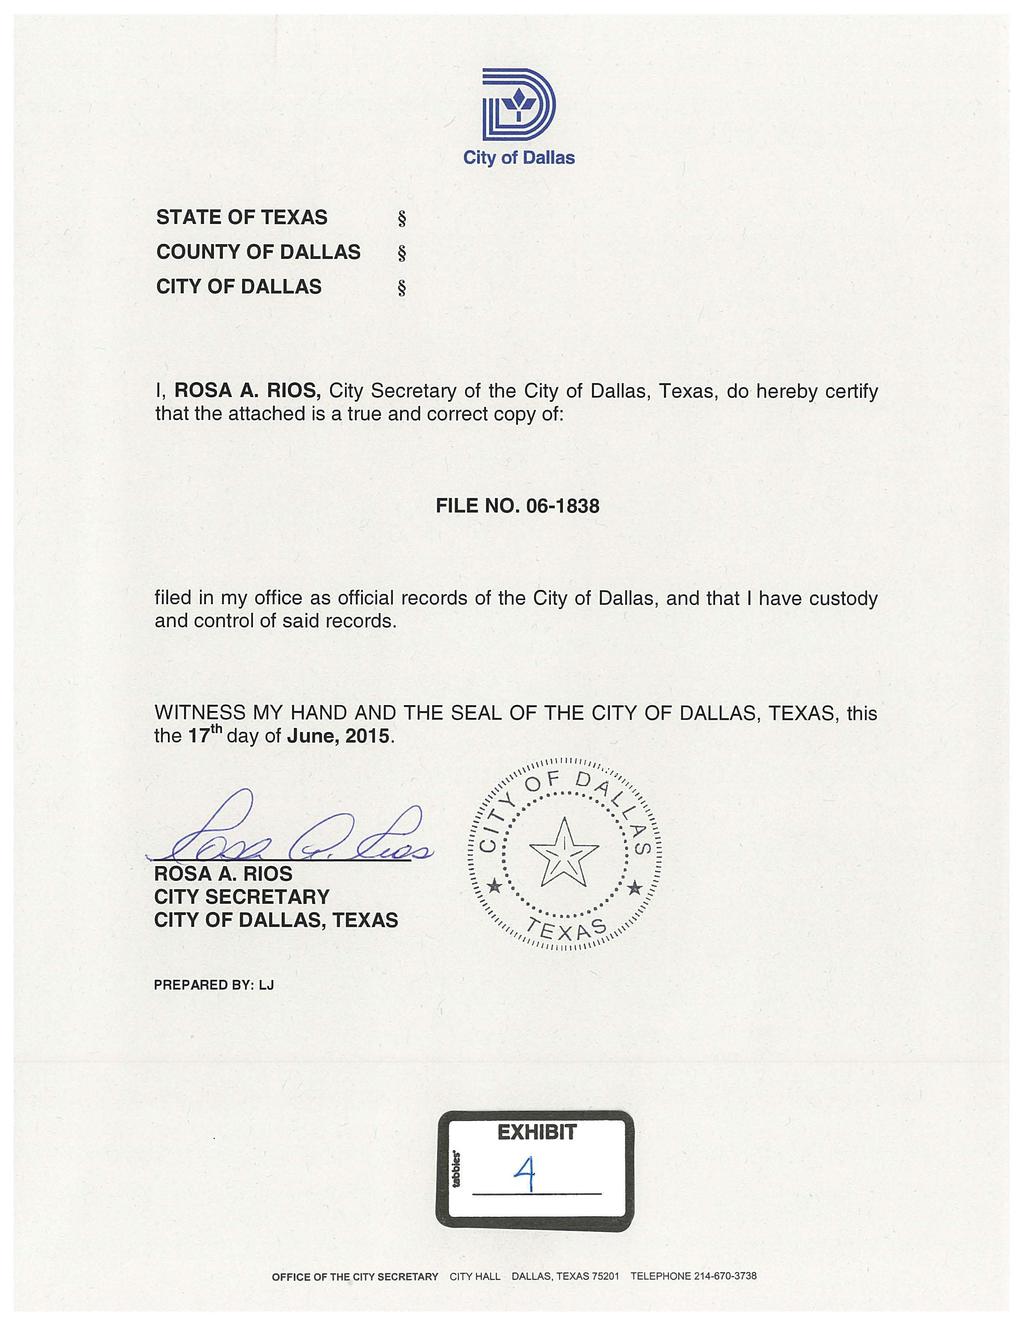 Case 3:15-cv-02069-K Document 1 Filed 06/17/15 Page 60 of 83 PageID 60 City of Dallas STATE OF TEXAS COUNTY OF DALLAS CITY OF DALLAS I, ROSA A.